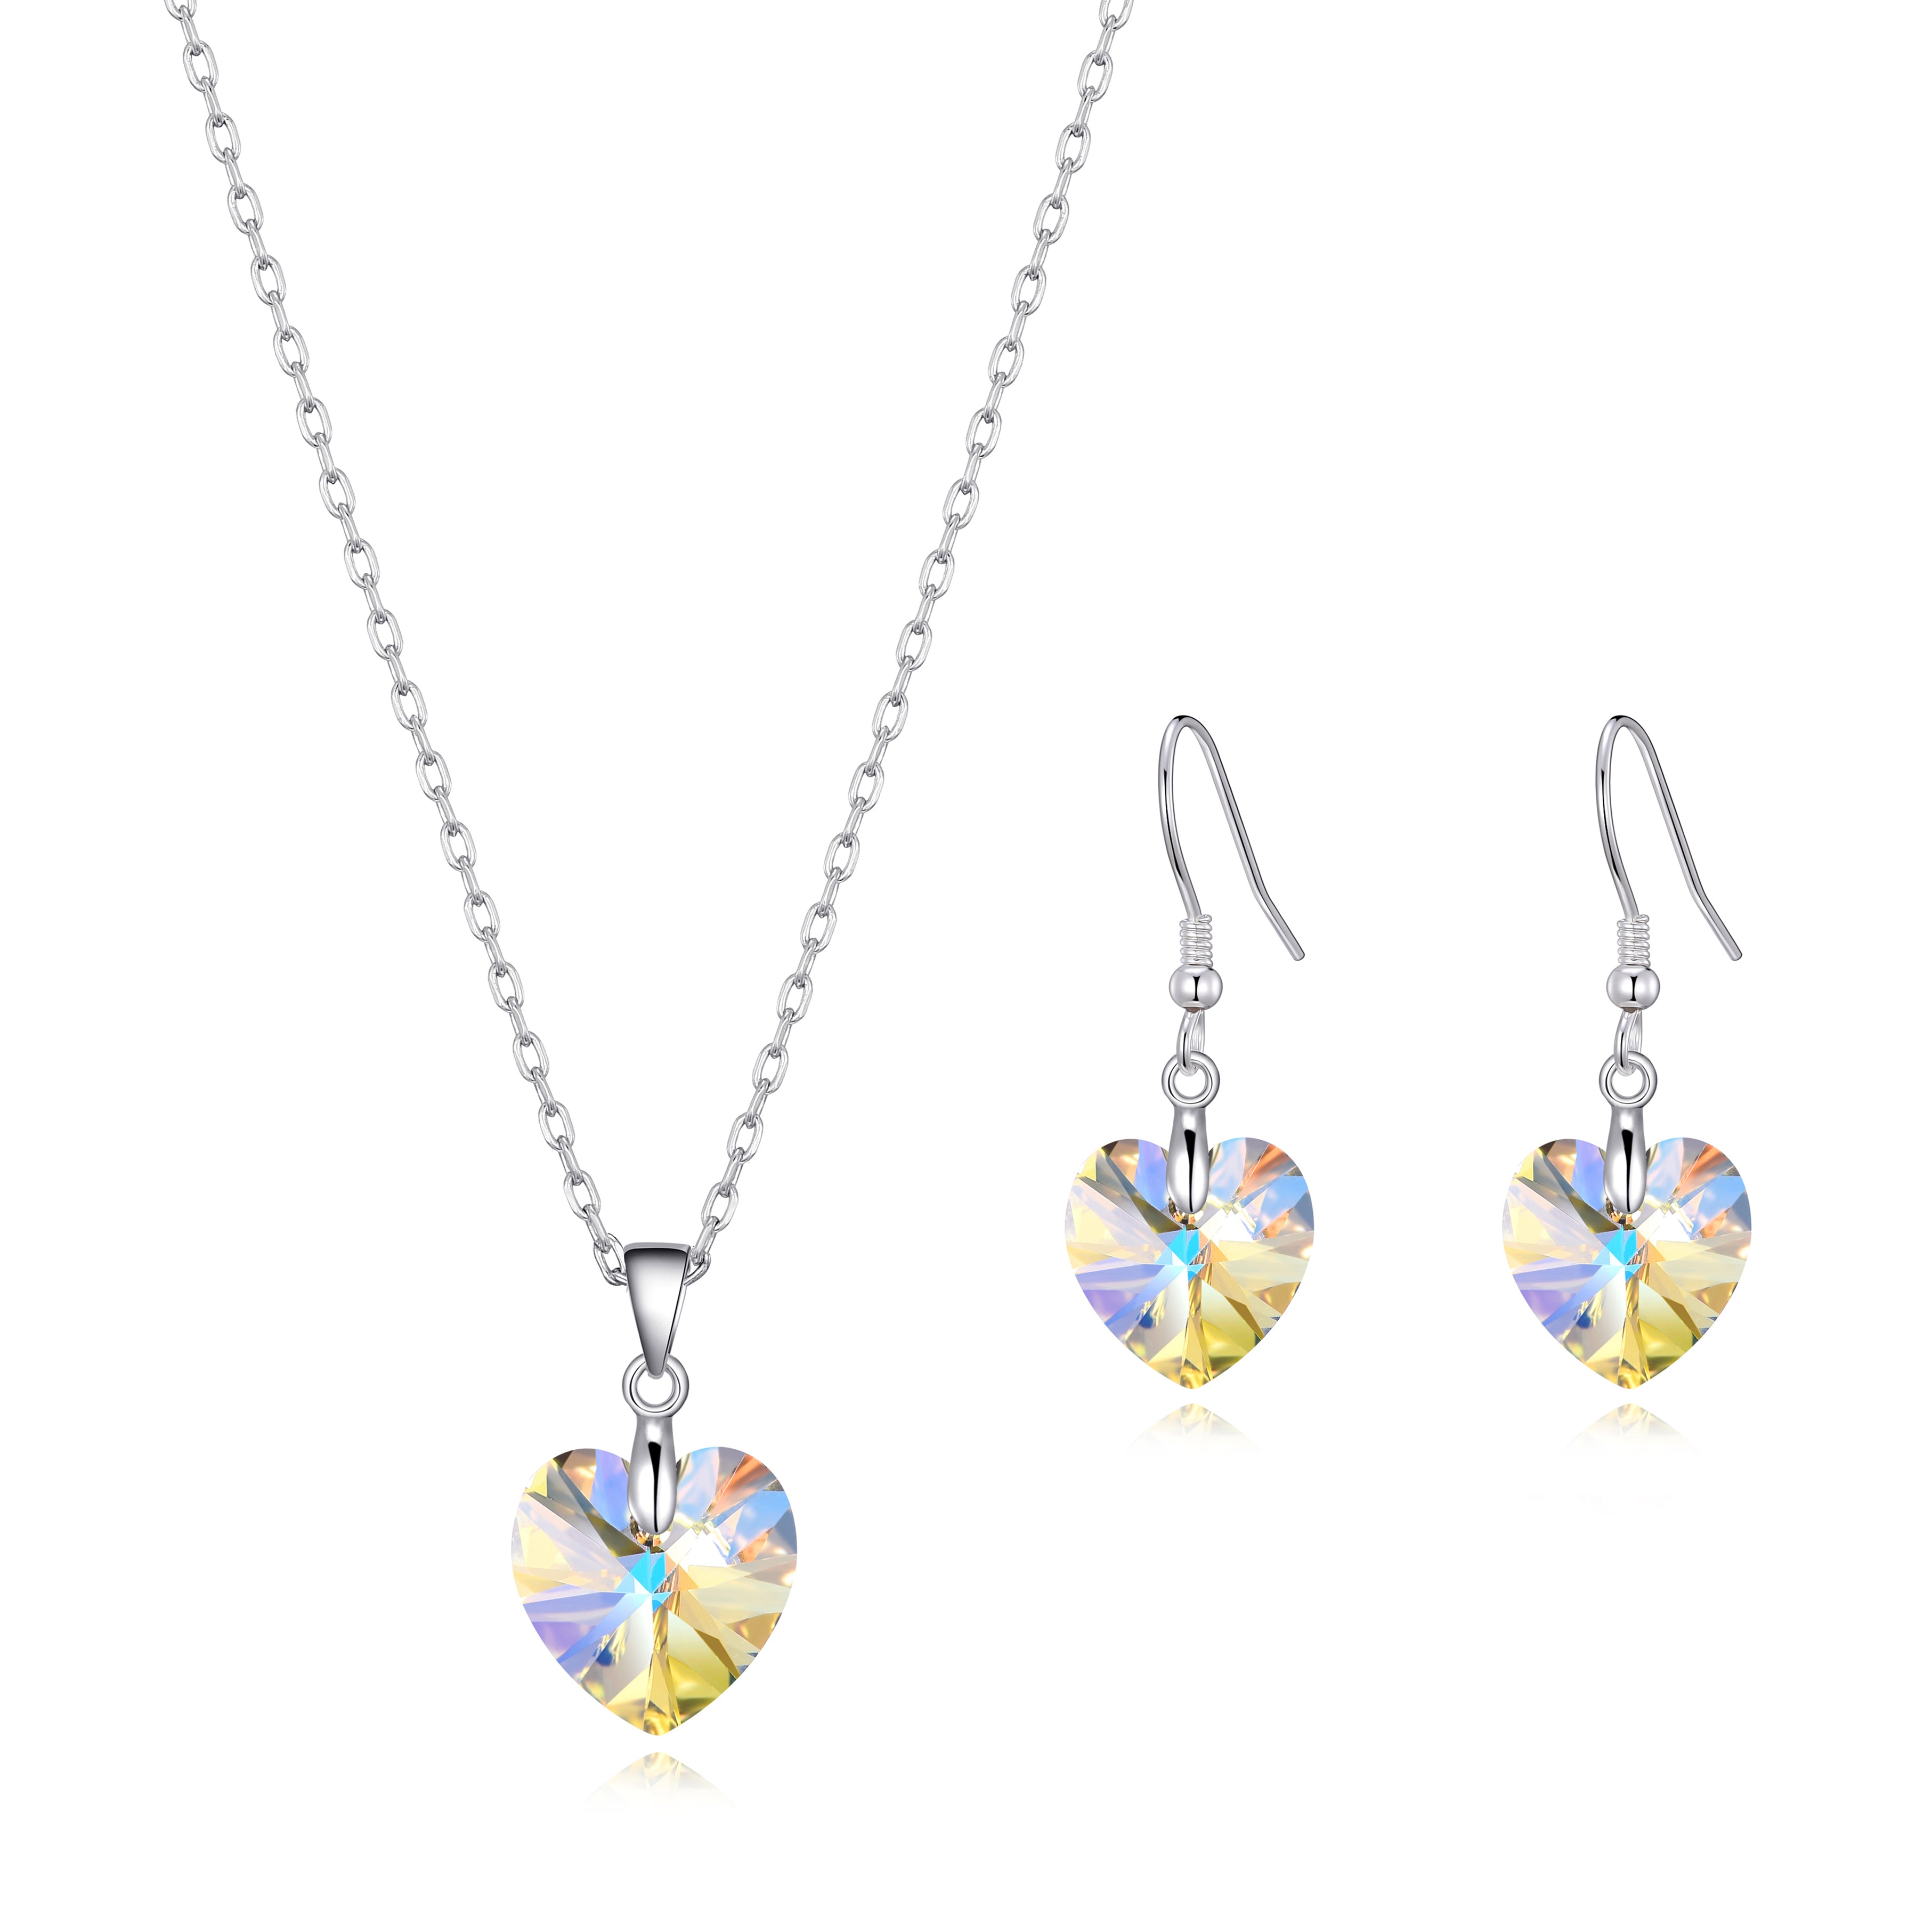 Sterling Silver Aurora Borealis Heart Set Created with Zircondia® Crystals by Philip Jones Jewellery